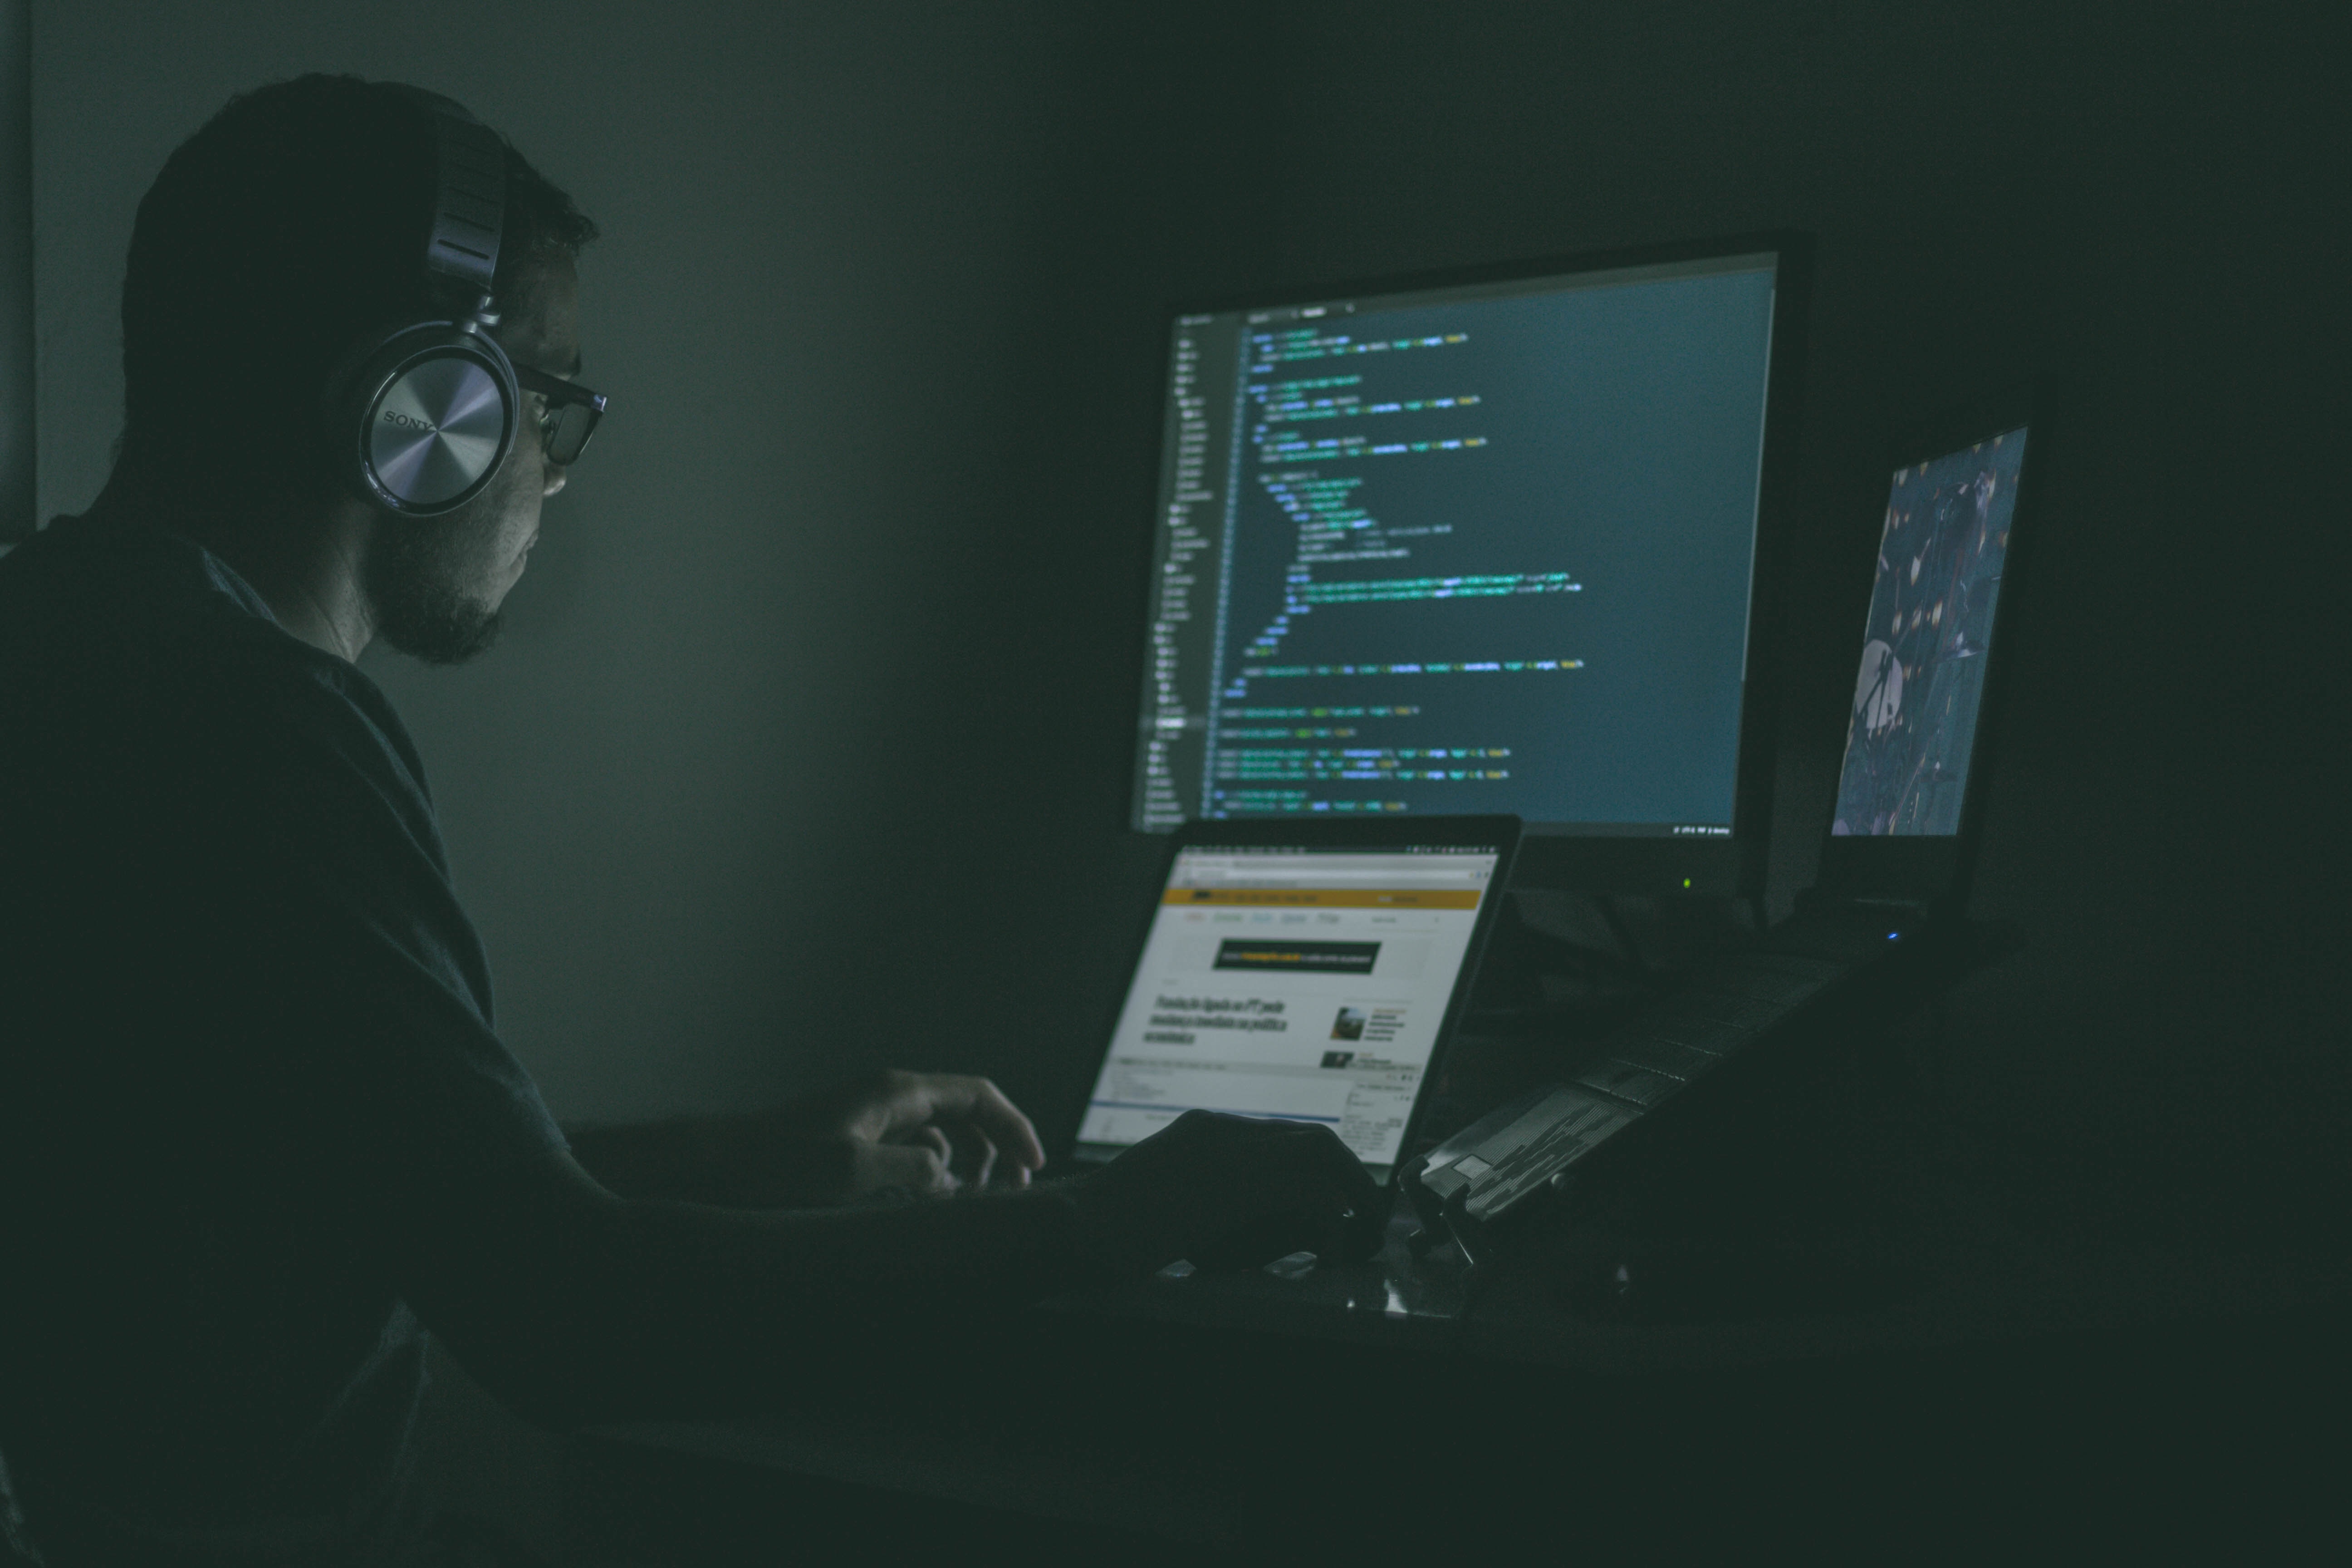 A man sits in a shadowy room in front of multiple computer screens. One is running a coding language.